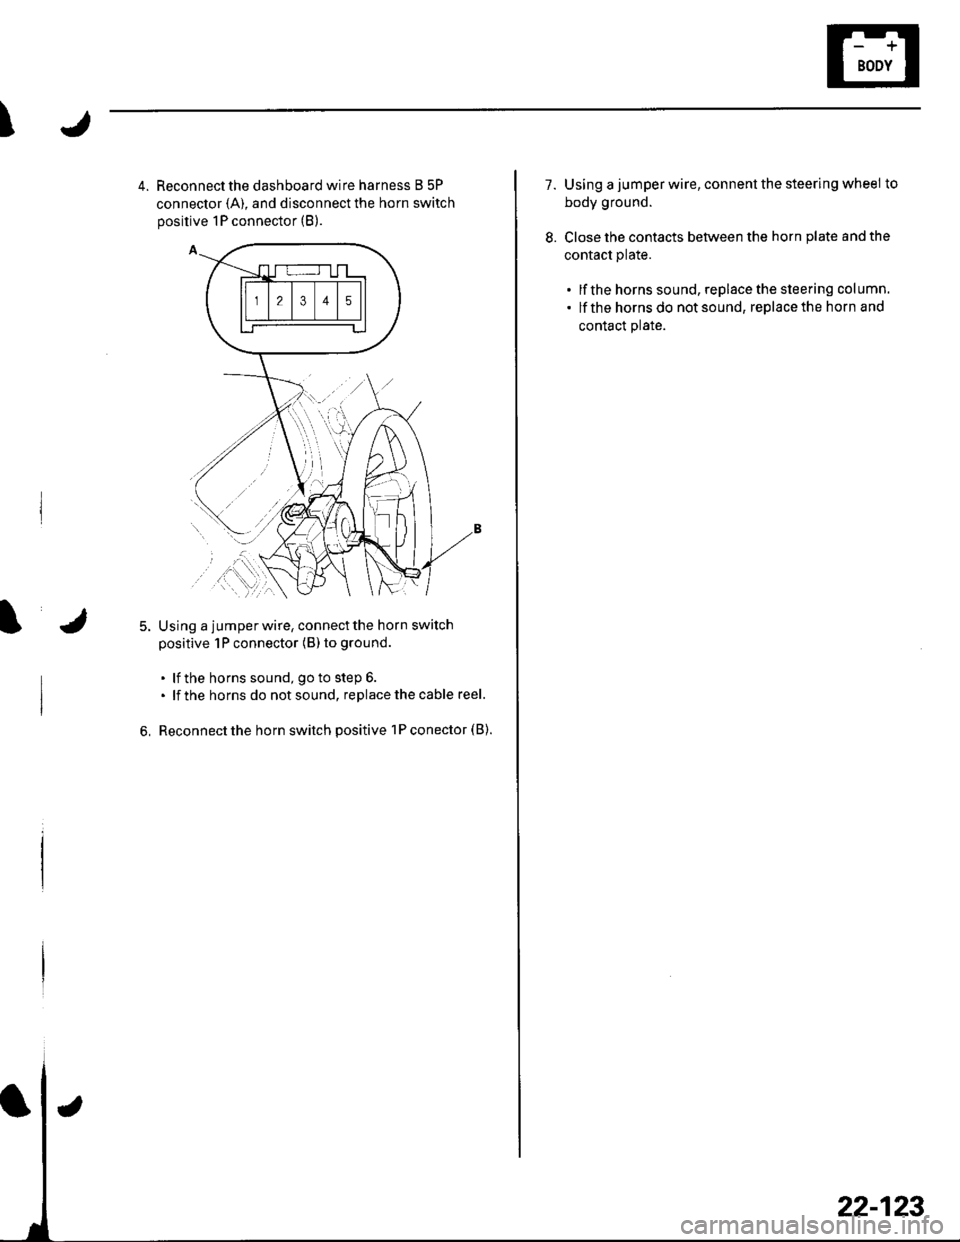 HONDA CIVIC 2003 7.G Workshop Manual I
4. Reconnect the dashboard wire harness B 5P
connector {A), and disconnect the horn switch
positive 1P connector (B).
Using a jumperwire, connectthe horn switch
positive 1P connector (B) to ground
.